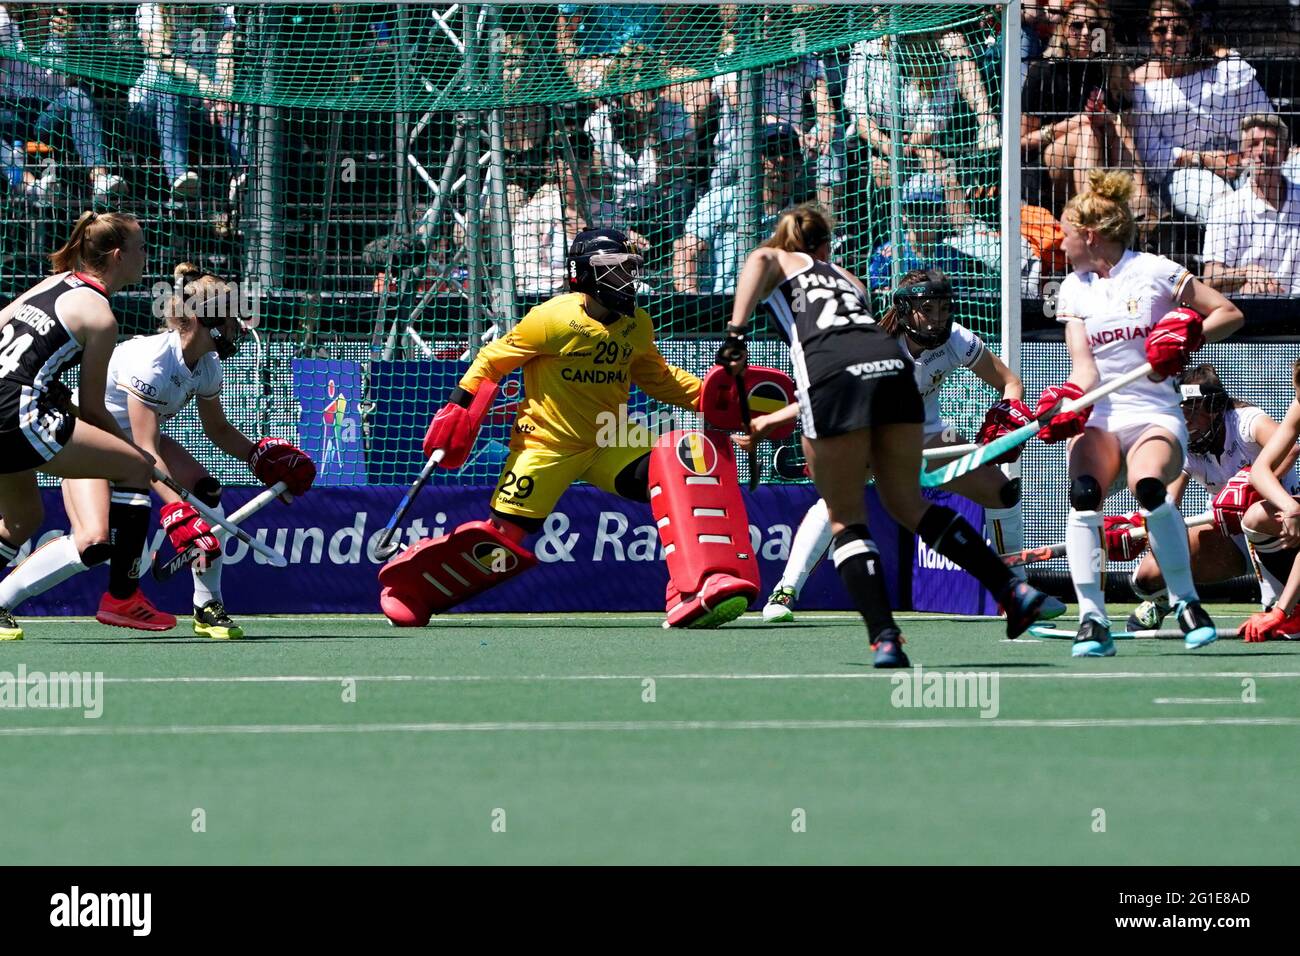 AMSTELVEEN, NETHERLANDS - JUNE 6: Elodie Picard of Belgium during the Euro Hockey Championships match between Duitsland and Belgie at Wagener Stadion Stock Photo